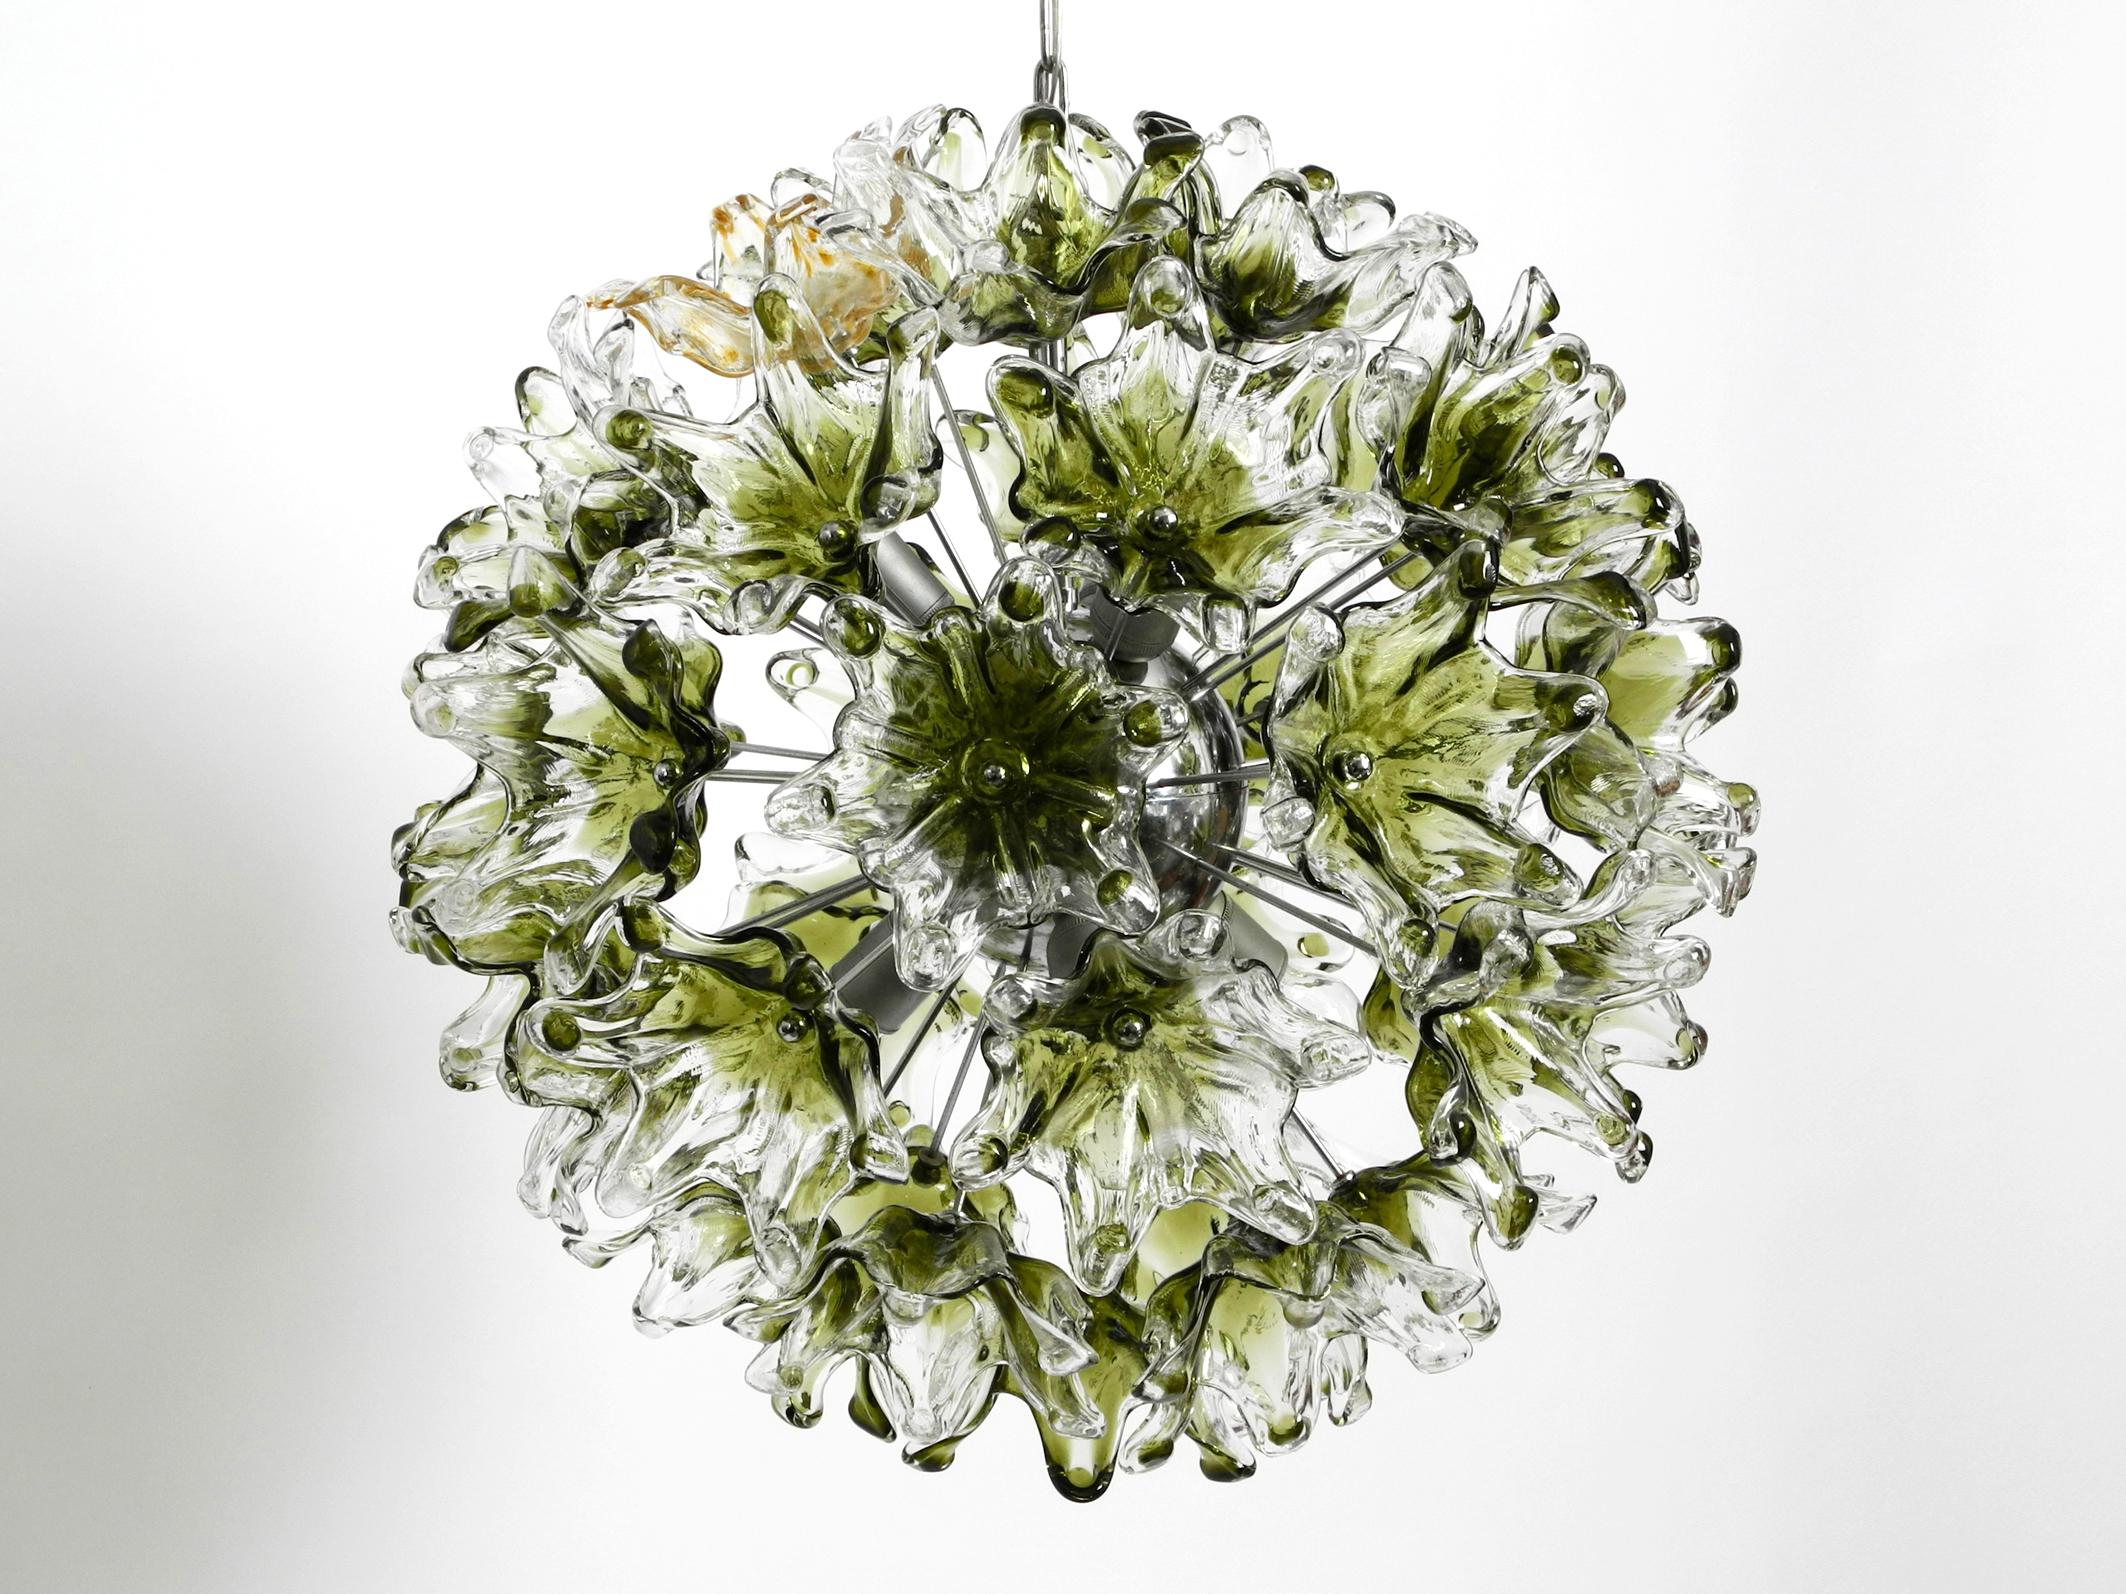 Unique, very rare, huge original 1960s pendant lamp or chandelier.
Manufactured by VeArt. Made in Italy.
Chromed metal frame with hand blown green tinted to clear
Murano glass shades in the shape of flower blossoms.
Very high quality and heavy